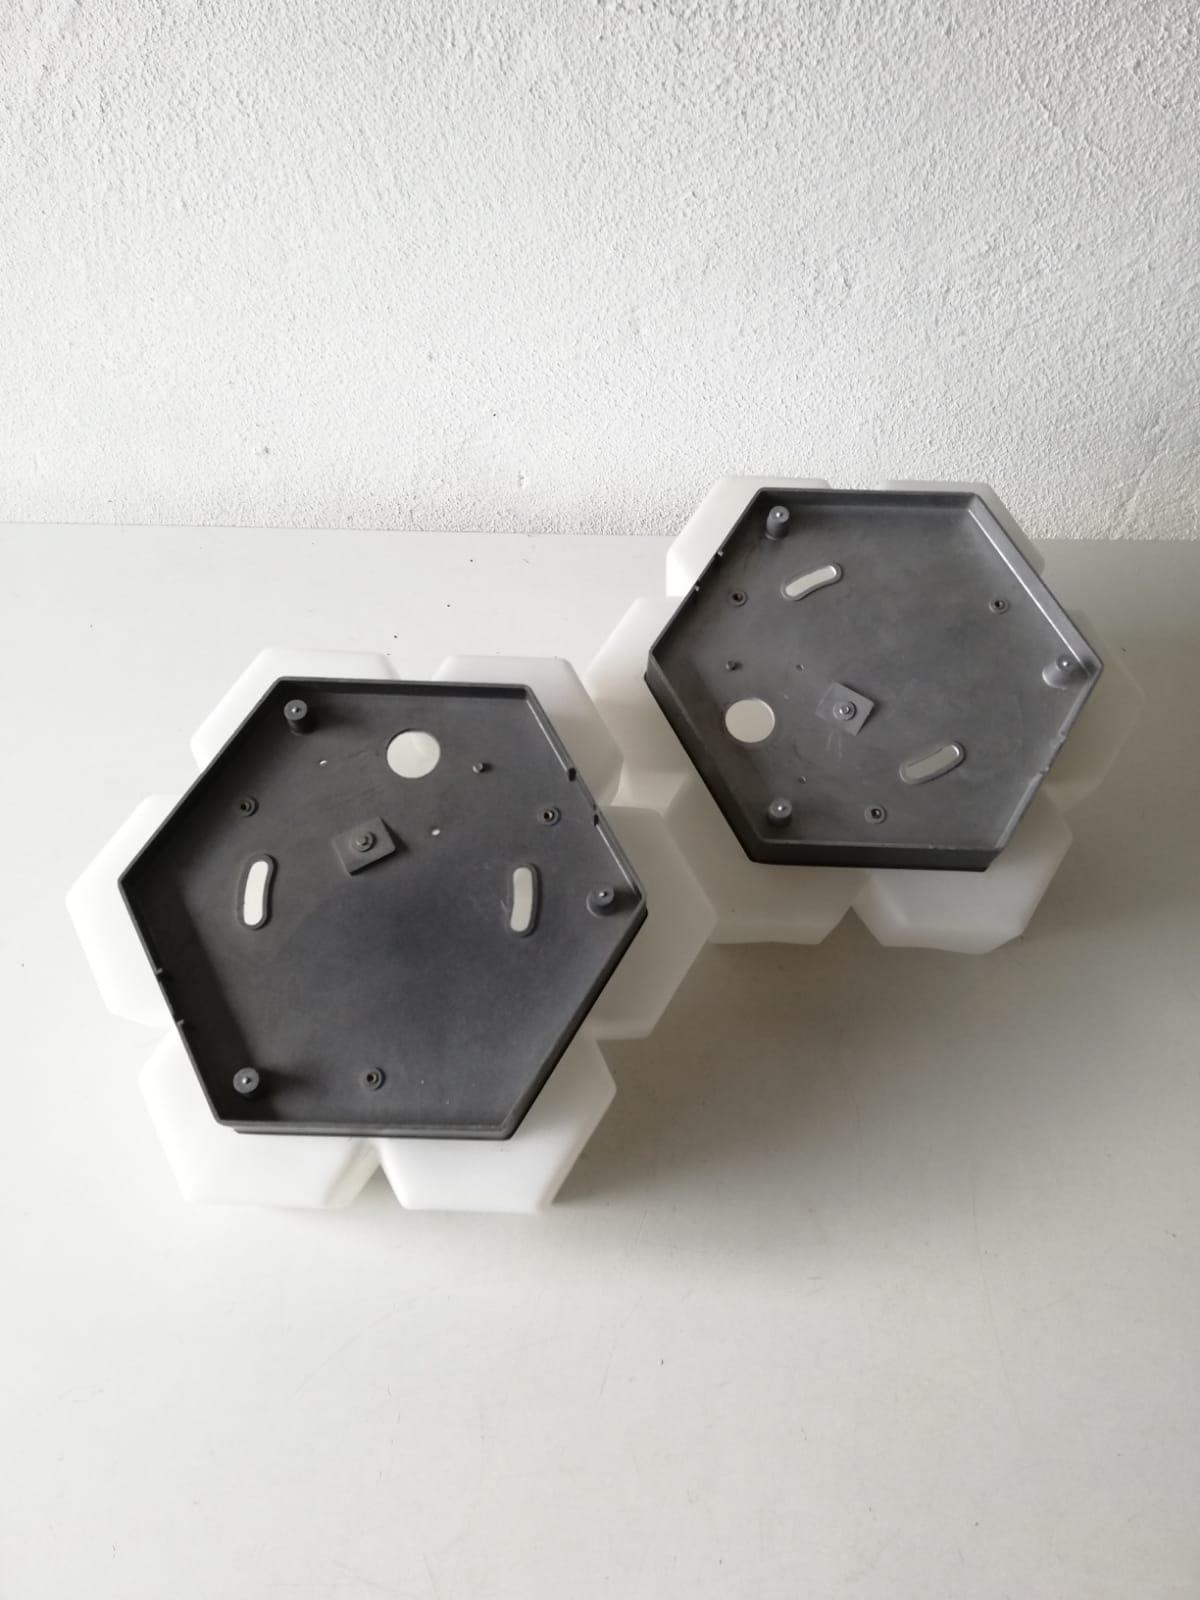 3 Dimensional Hexagonal Opal Glass Pair of Wall Lamps by BEGA, 1960s Germany 2